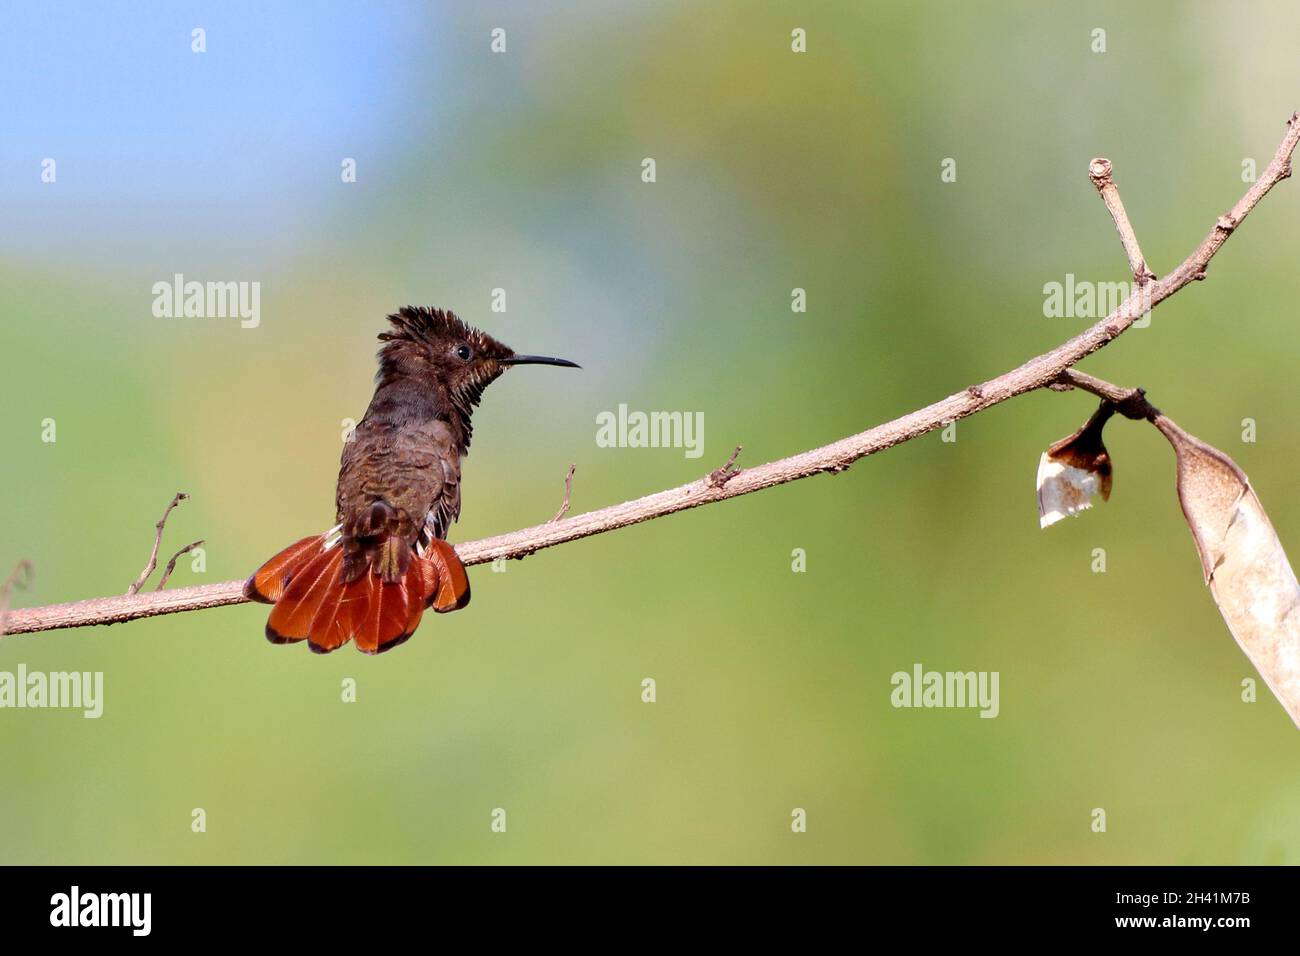 male Ruby-topaz Hummingbird (Chrysolampis mosquitus) perched on a branch against a blurred and greenish background Stock Photo